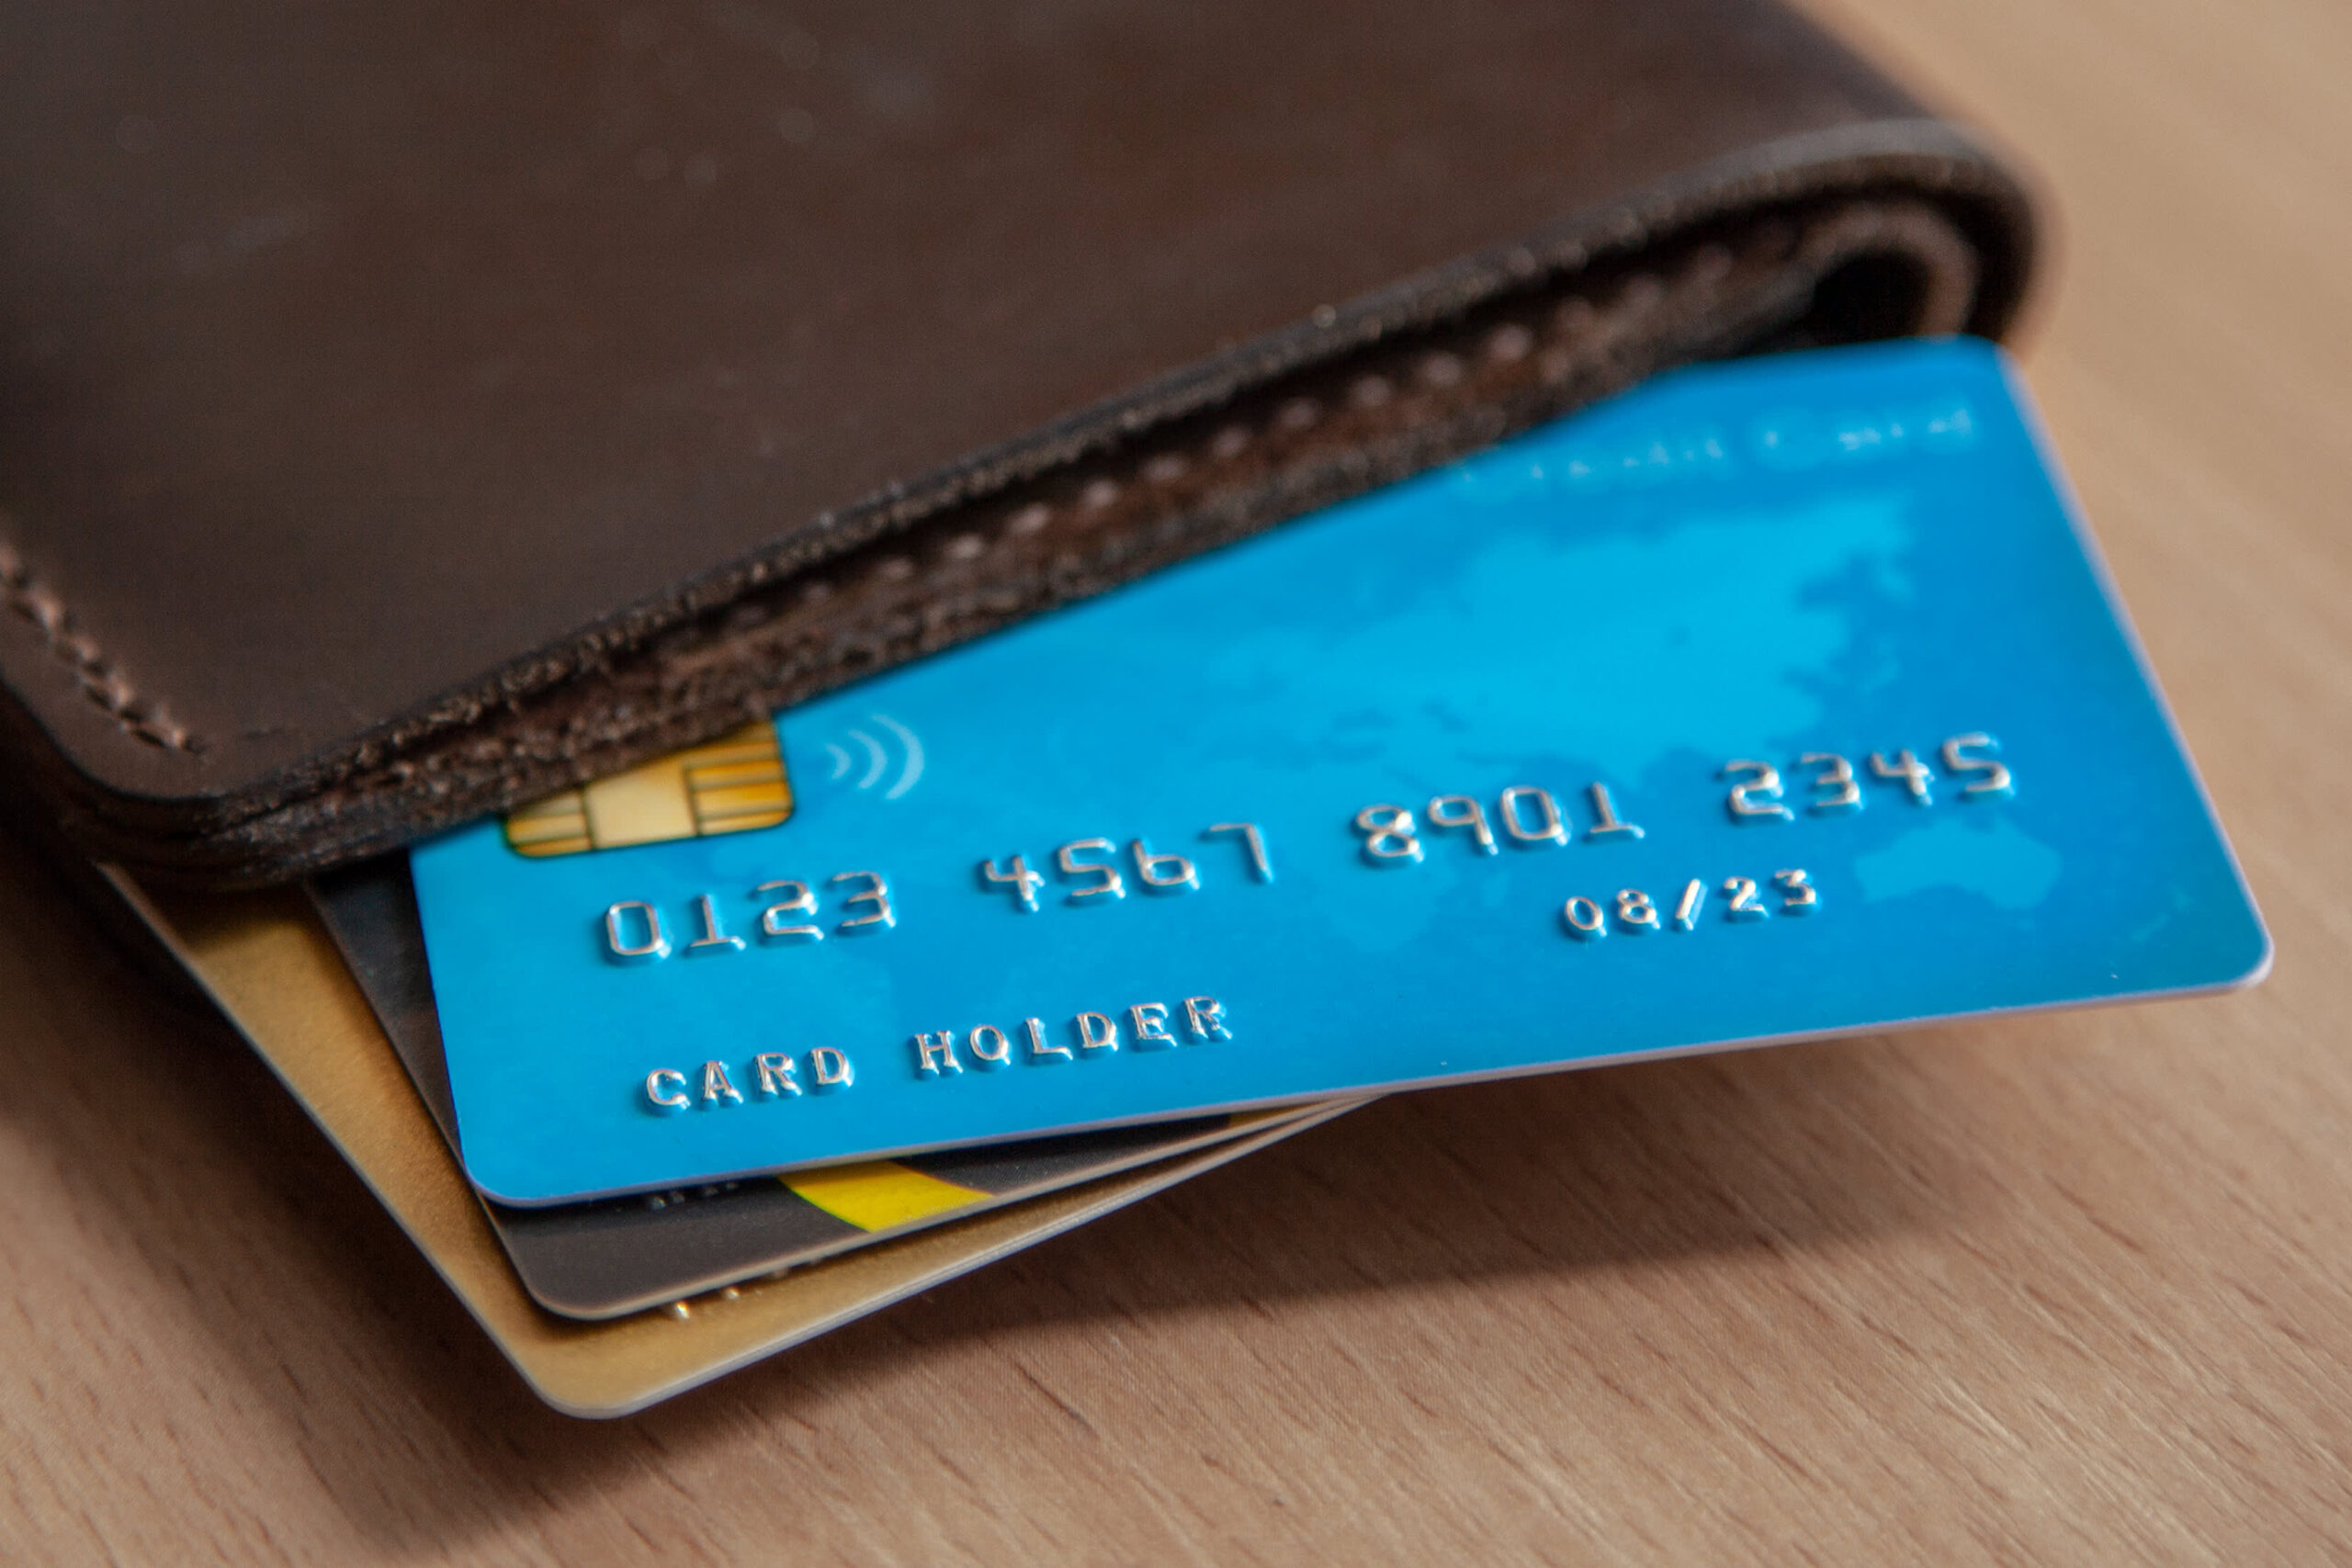 How to Get an Unlimited Cash Back Credit Card?